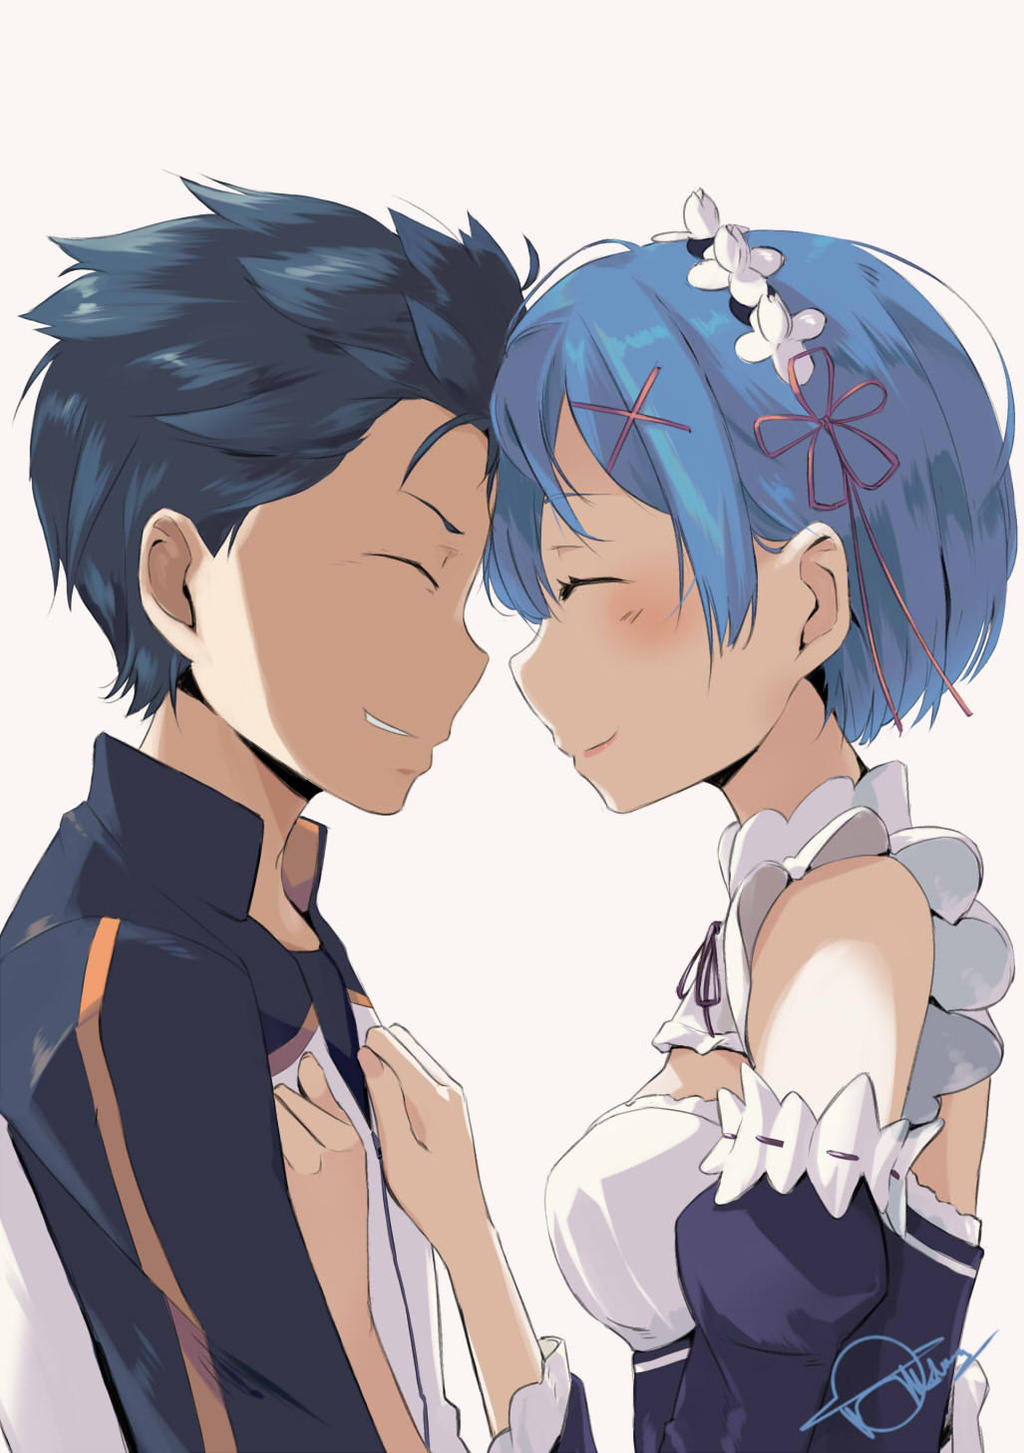 Fan art Subaru and Rem from Re Zero by Genocide06 on